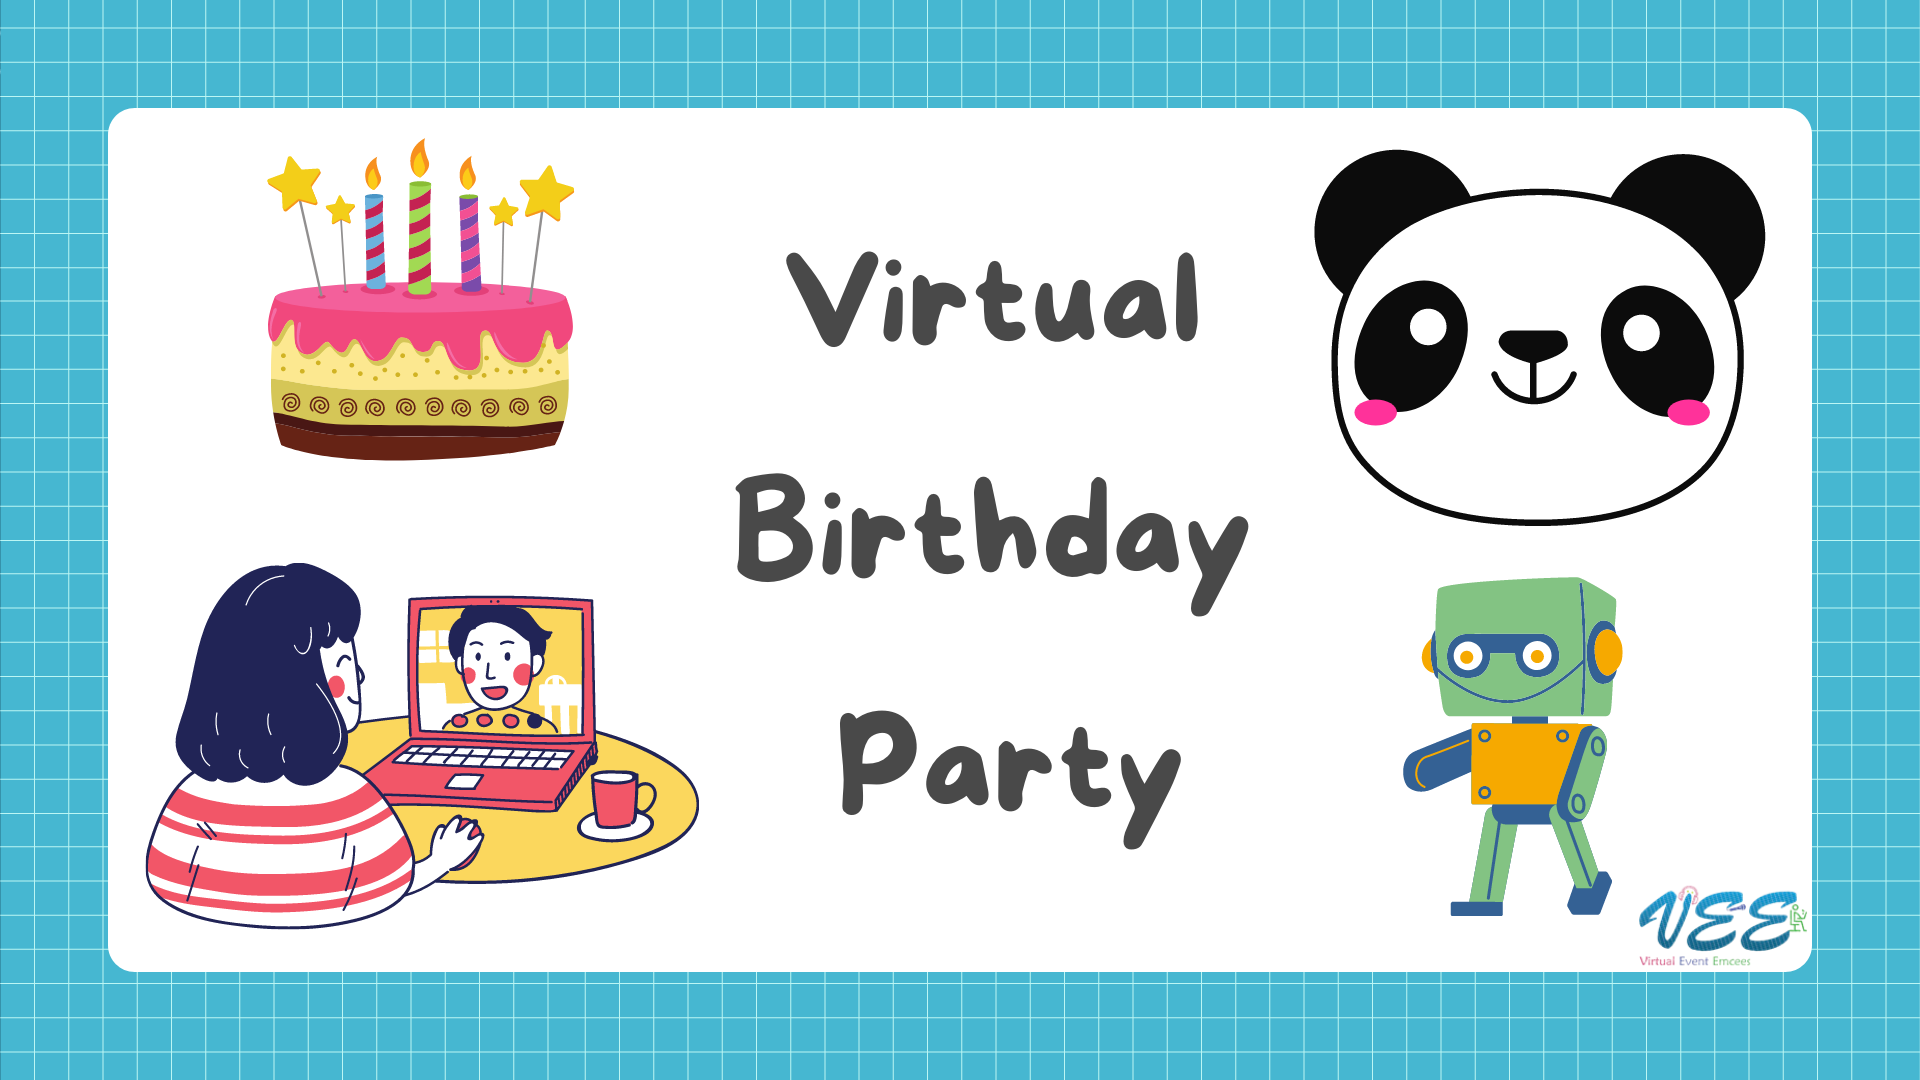 Event Plan for Virtual Birthday Party